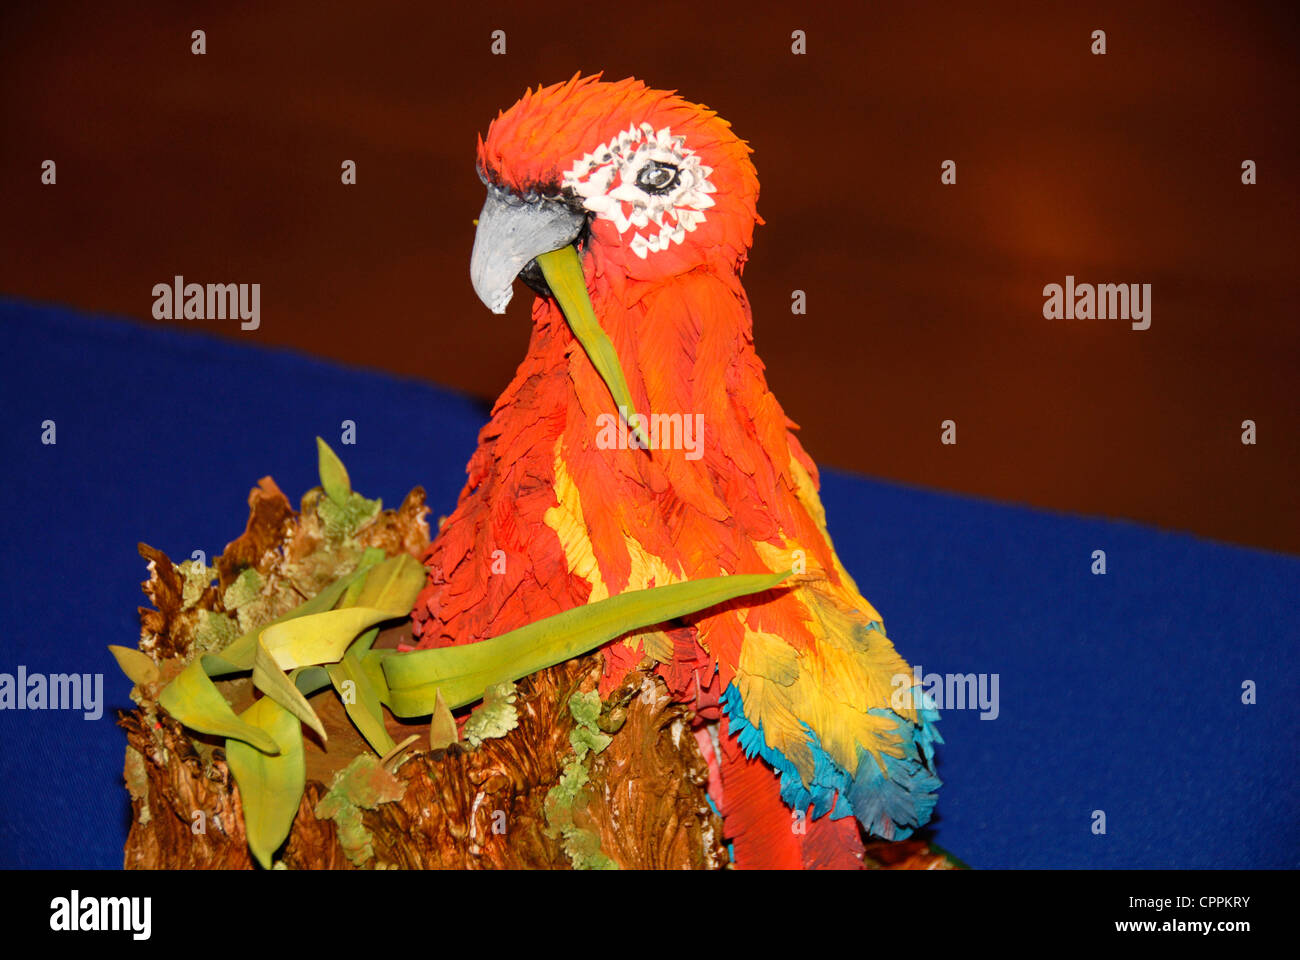 Colorful head of parrot in sugar as cake top at exhibition Stock Photo